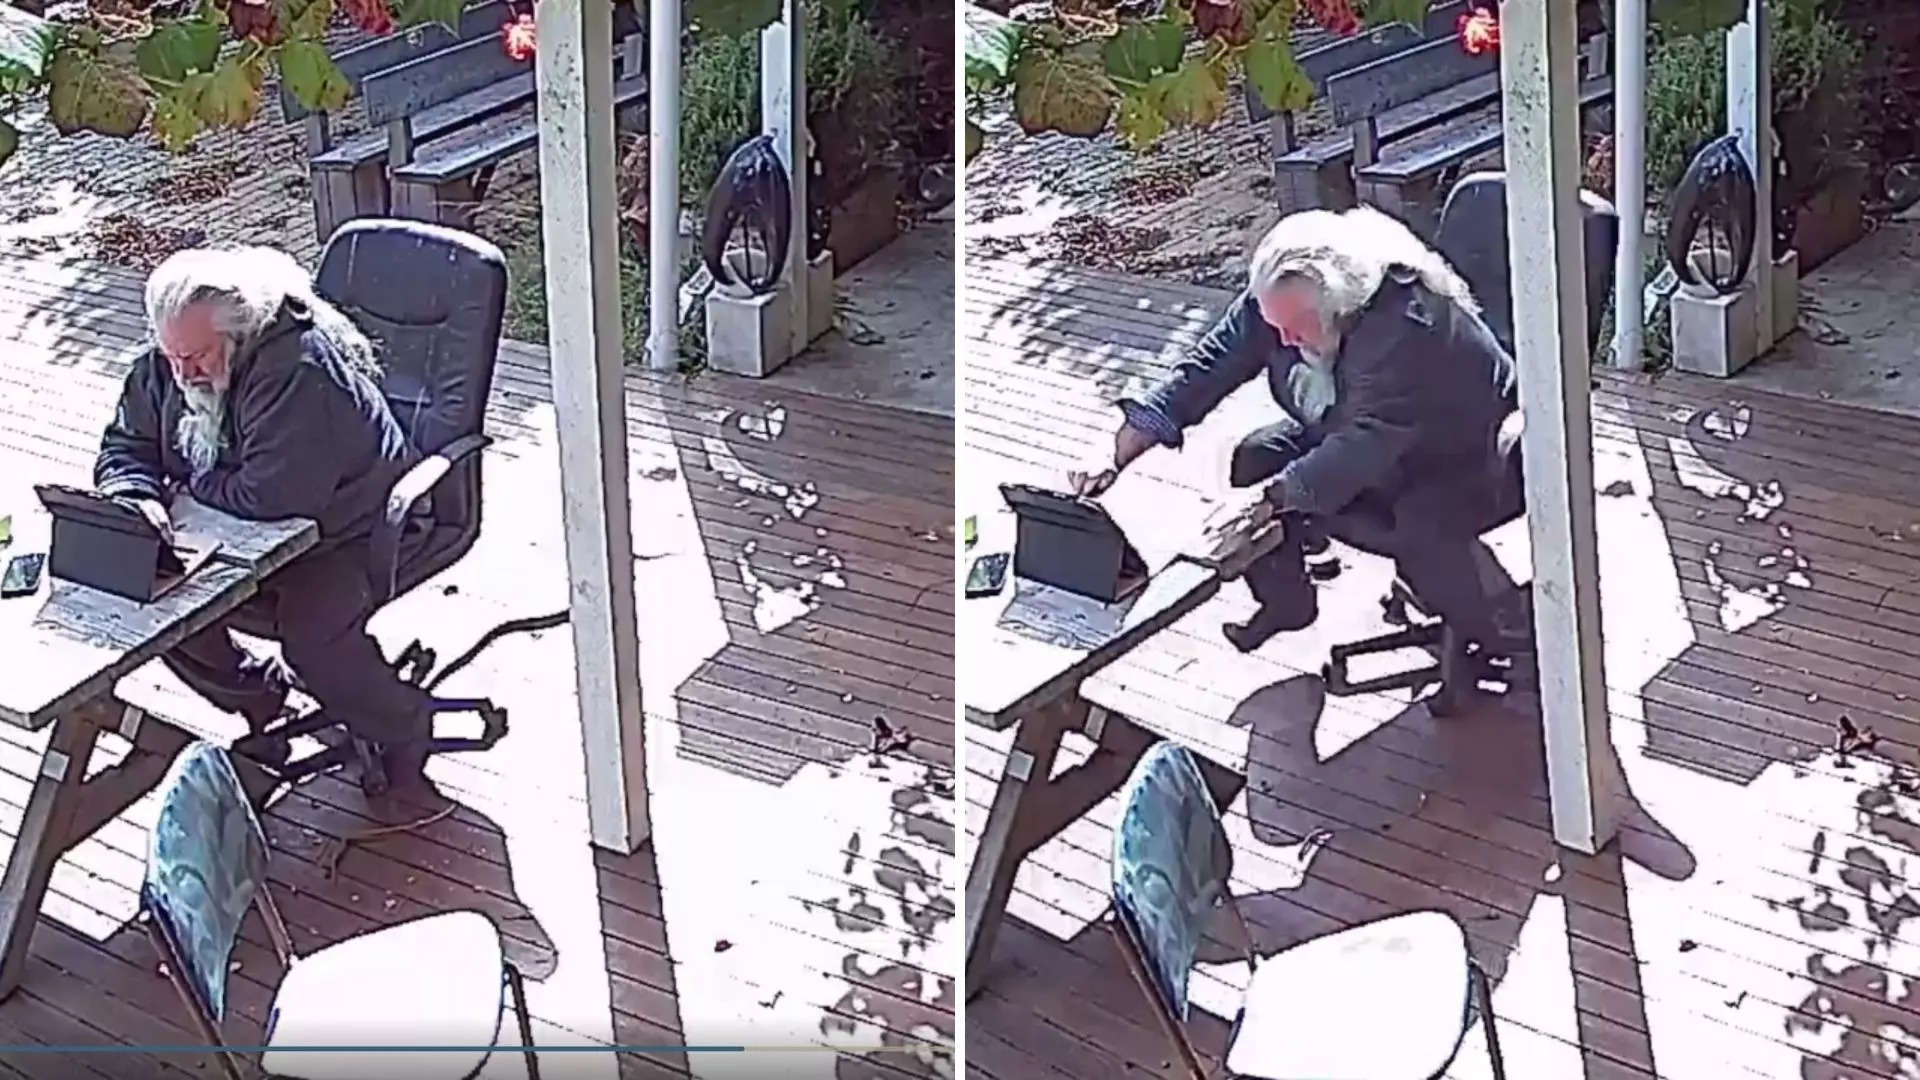 Gippsland's Malcolm had an unexpected encounter on his deck | Image: Reddit